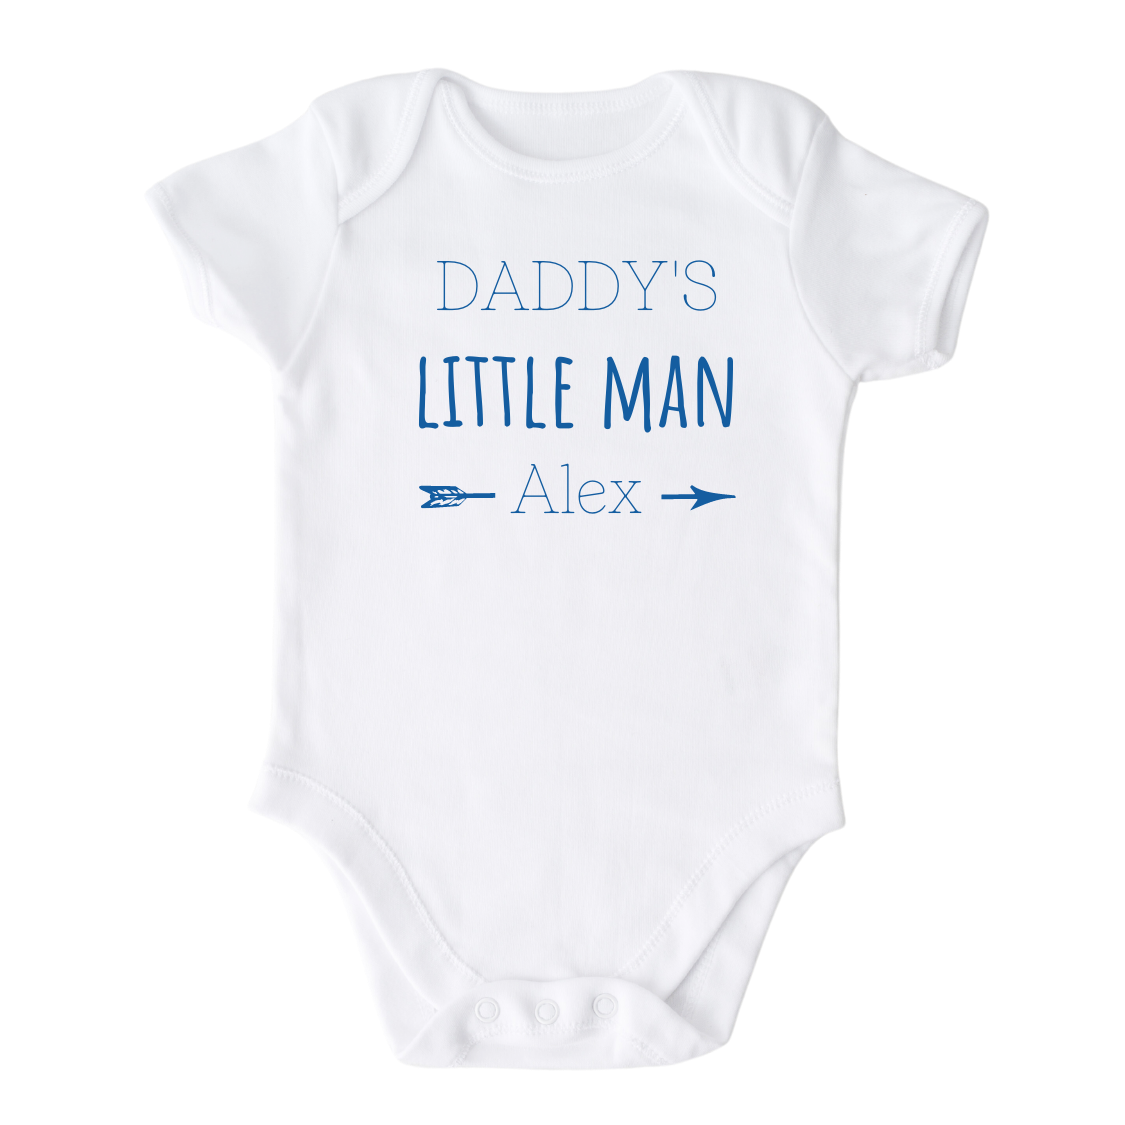 white baby bodysuit with customizable name option and the text 'Daddy's Little Man'.